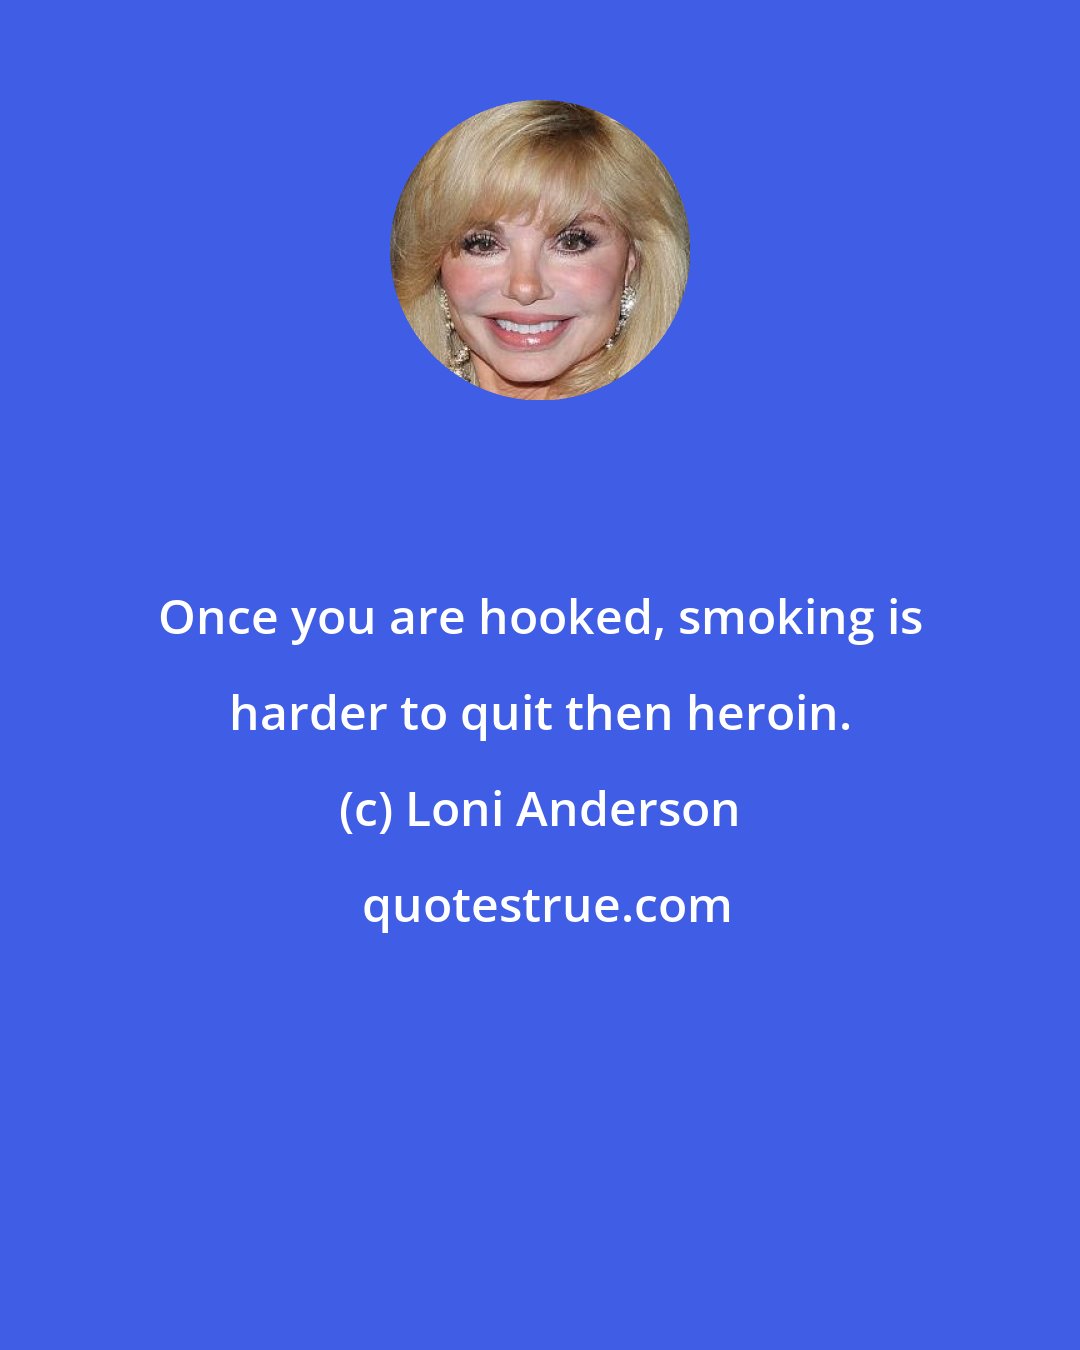 Loni Anderson: Once you are hooked, smoking is harder to quit then heroin.